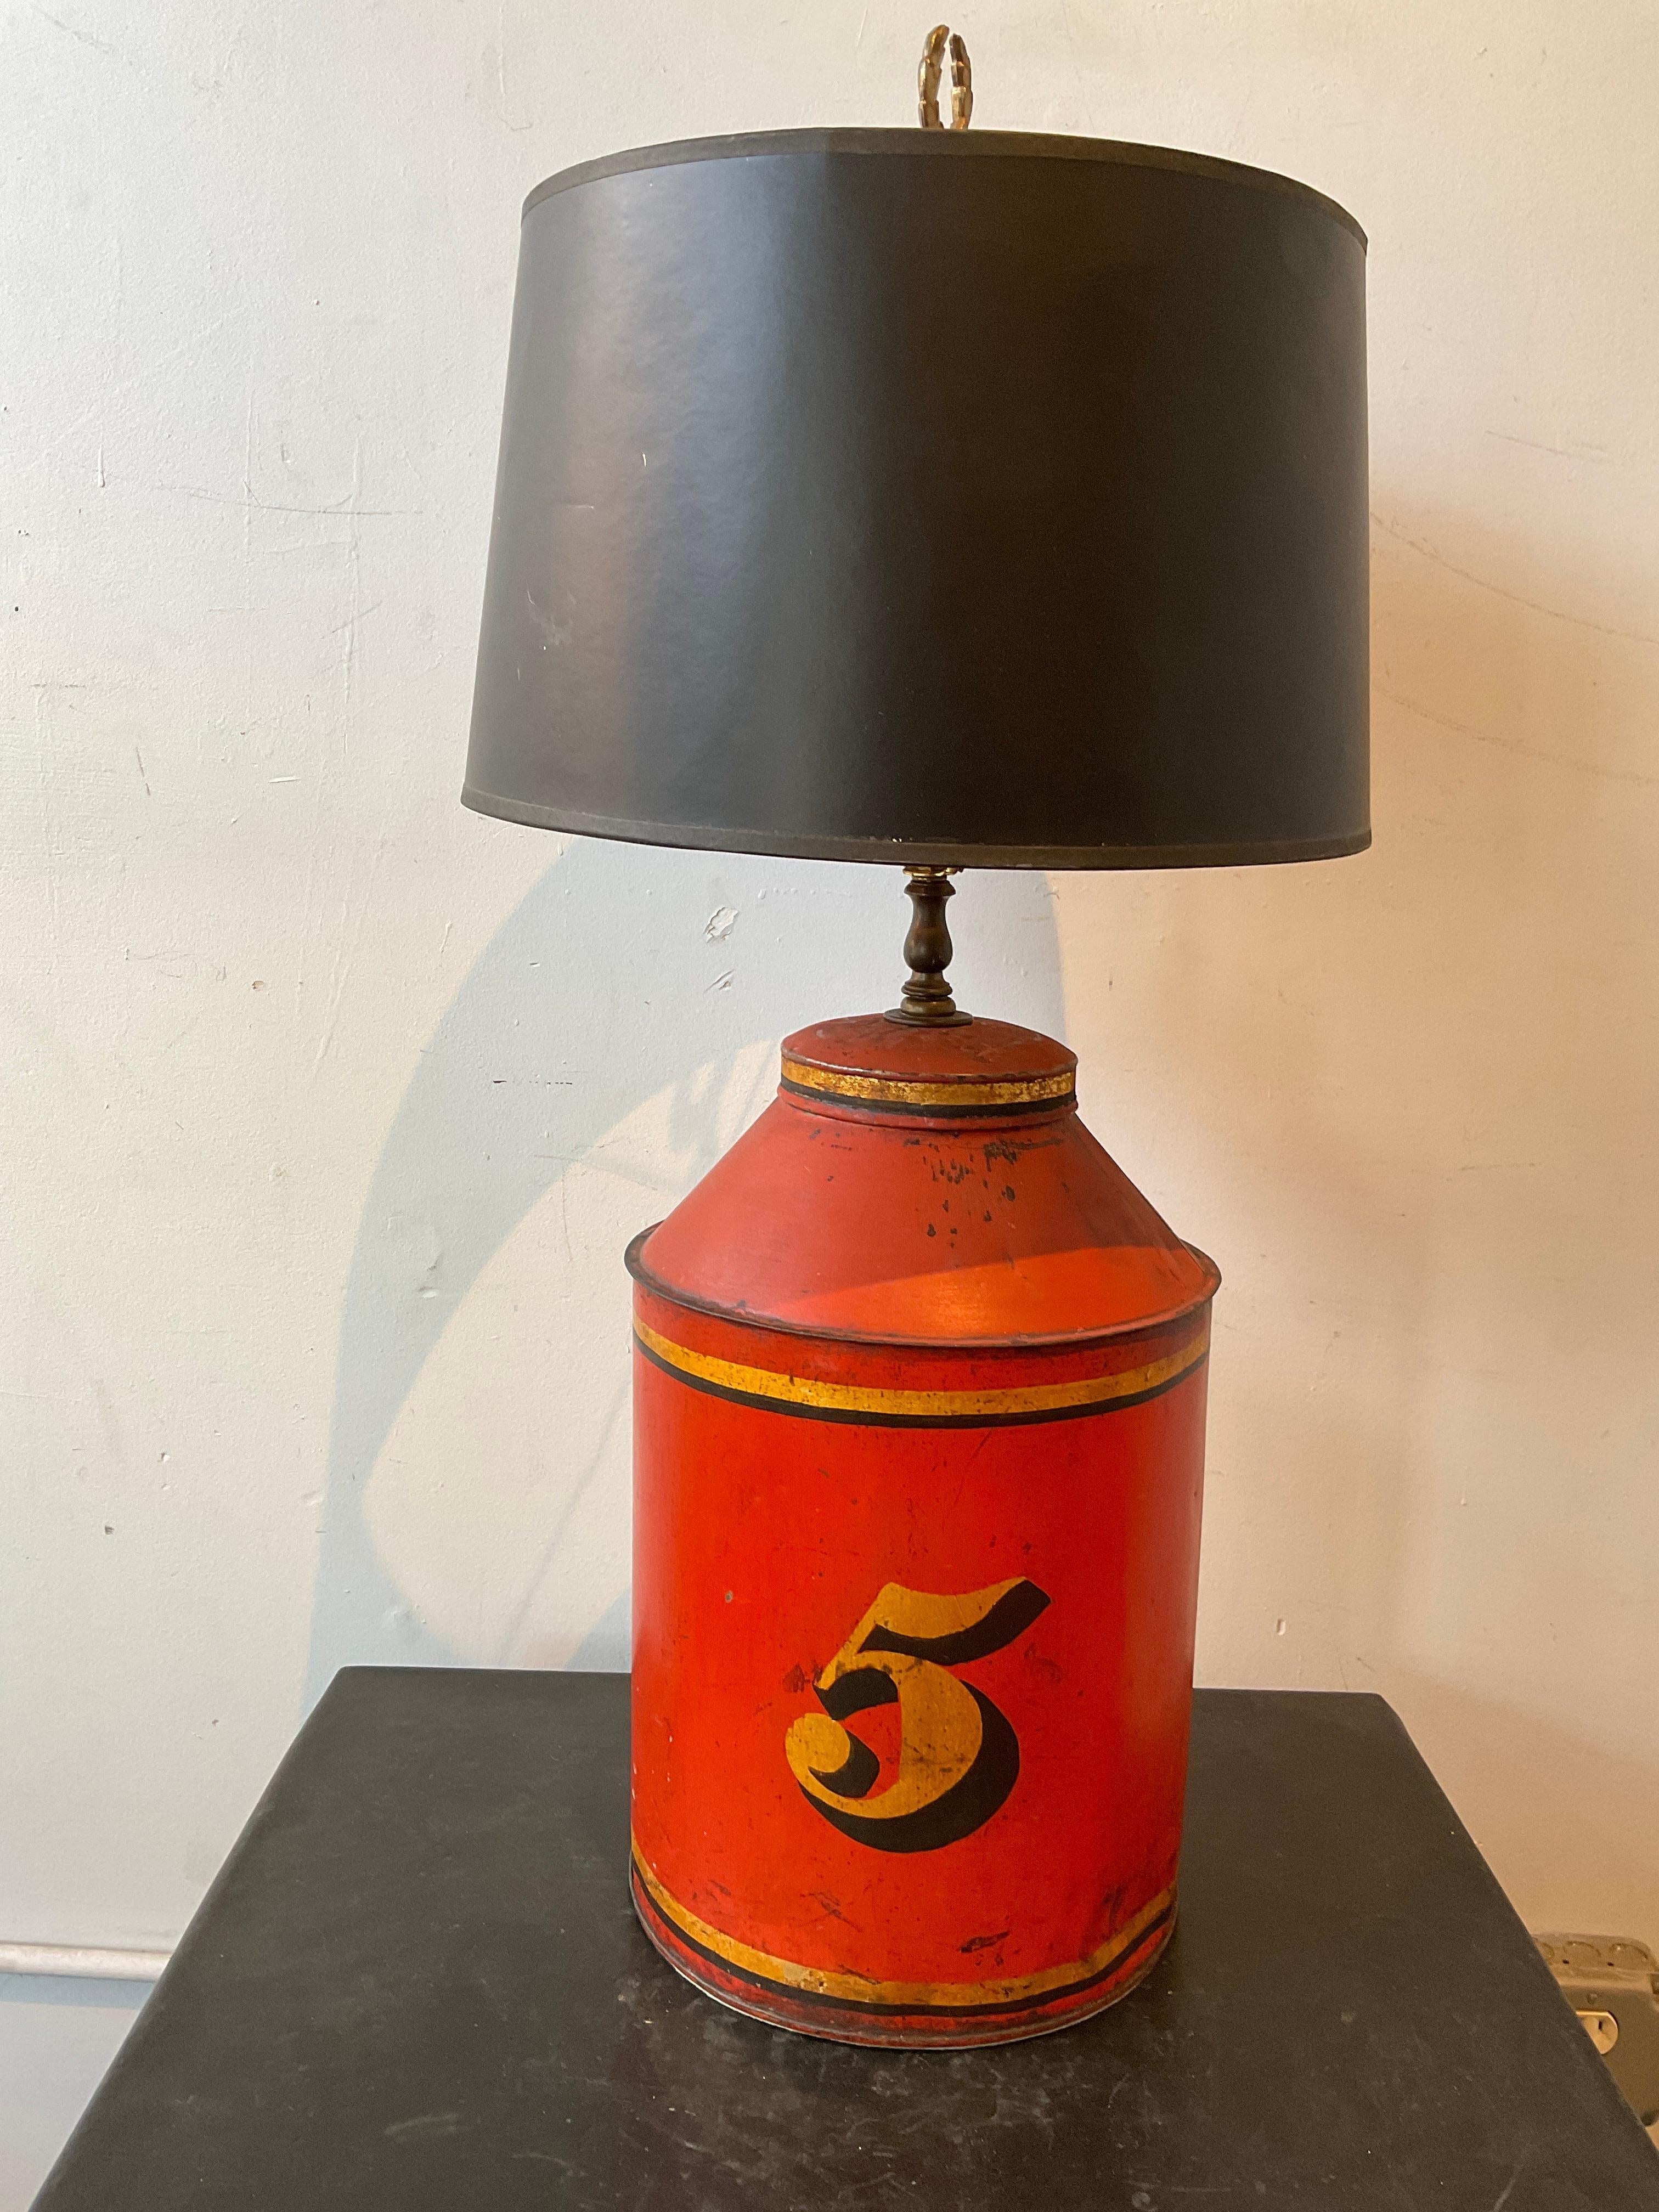 1880s tole tea canister turned into a lamp.The height is to the top of the socket. The height of just the canister is 17”. There’s a few dents in the canister as shown in pictures.
Shade not included. Needs rewiring.